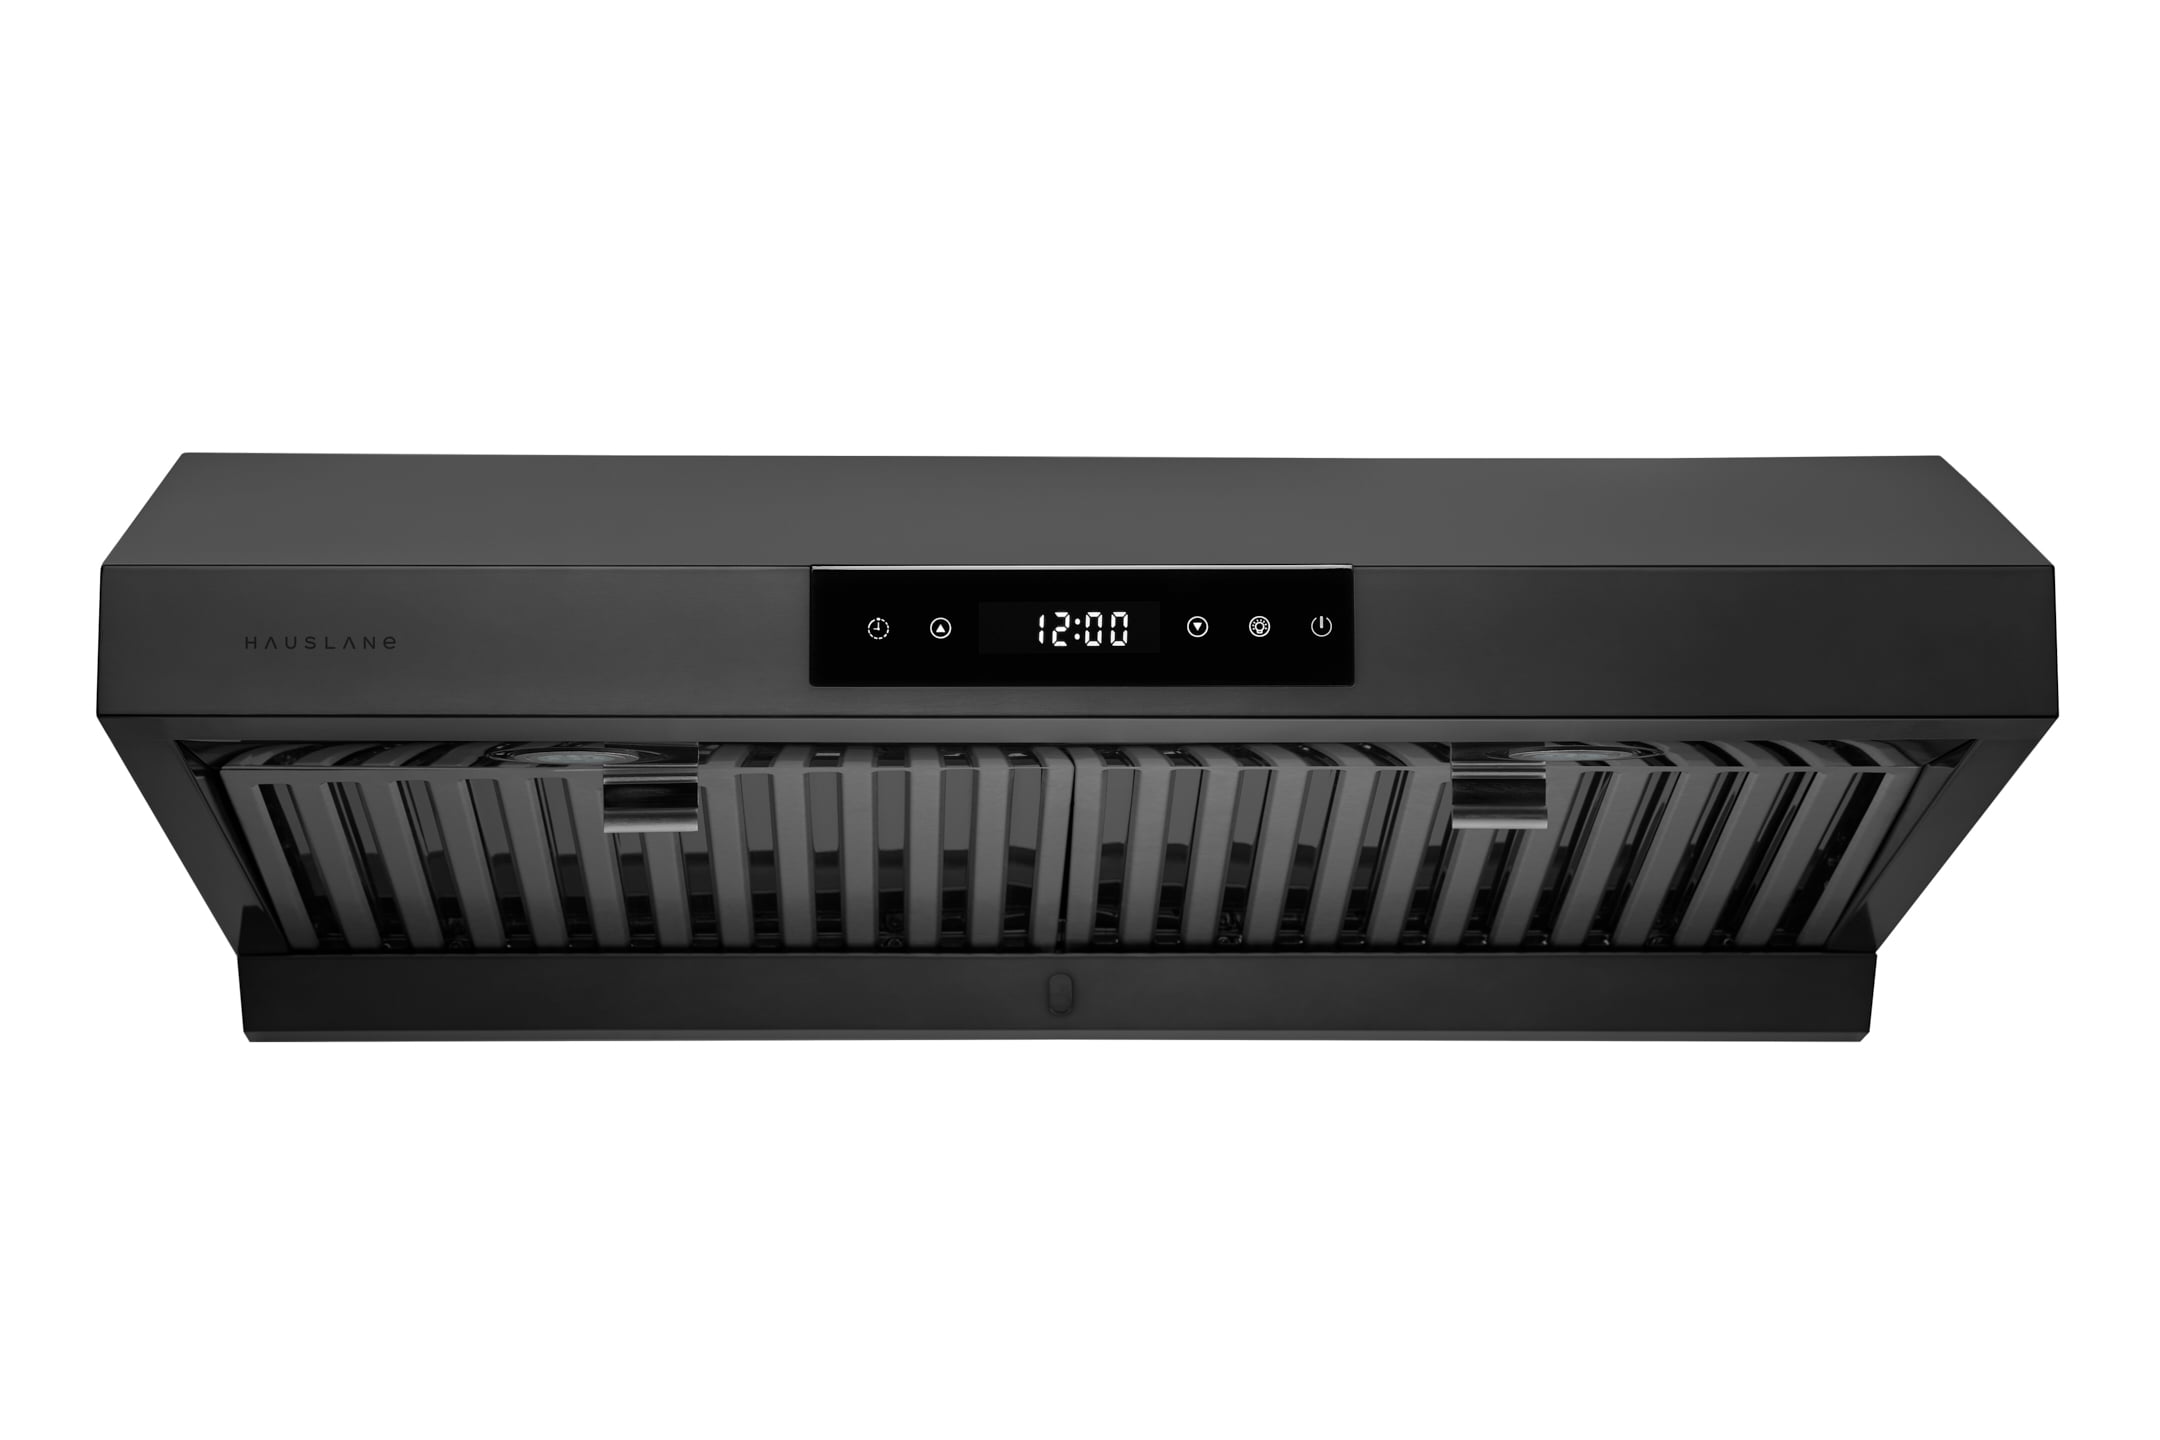 Hauslane, Chef Series 30 PS18 Under Cabinet Range Hood, Black Stainless  Steel | Pro Performance | Contemporary Design, Touch Screen, Dishwasher  Safe